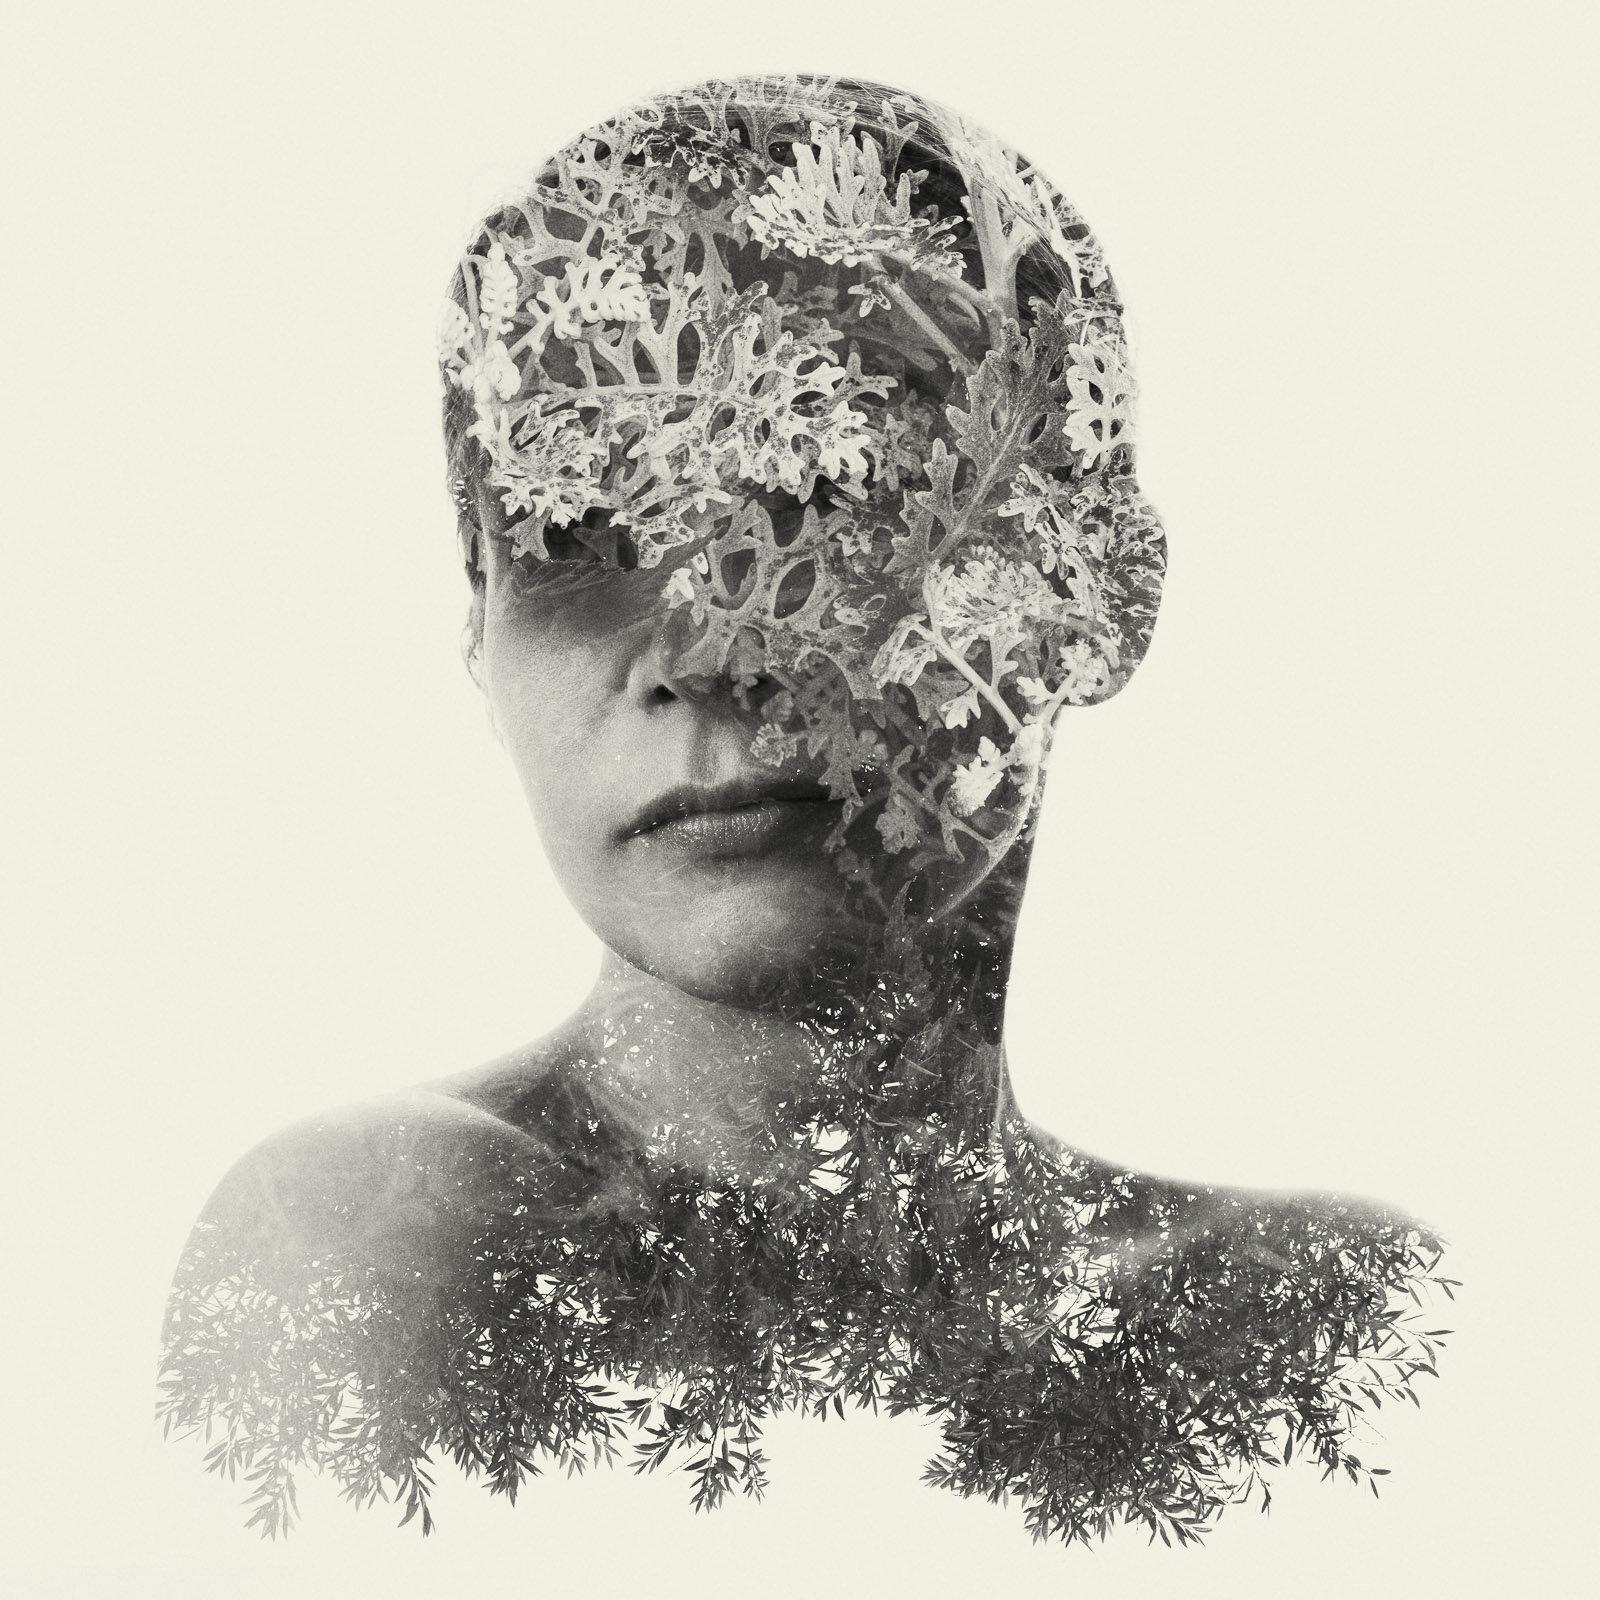 Christoffer Relander Black and White Photograph - Guardian - black and white portrait and nature multi exposure photograph